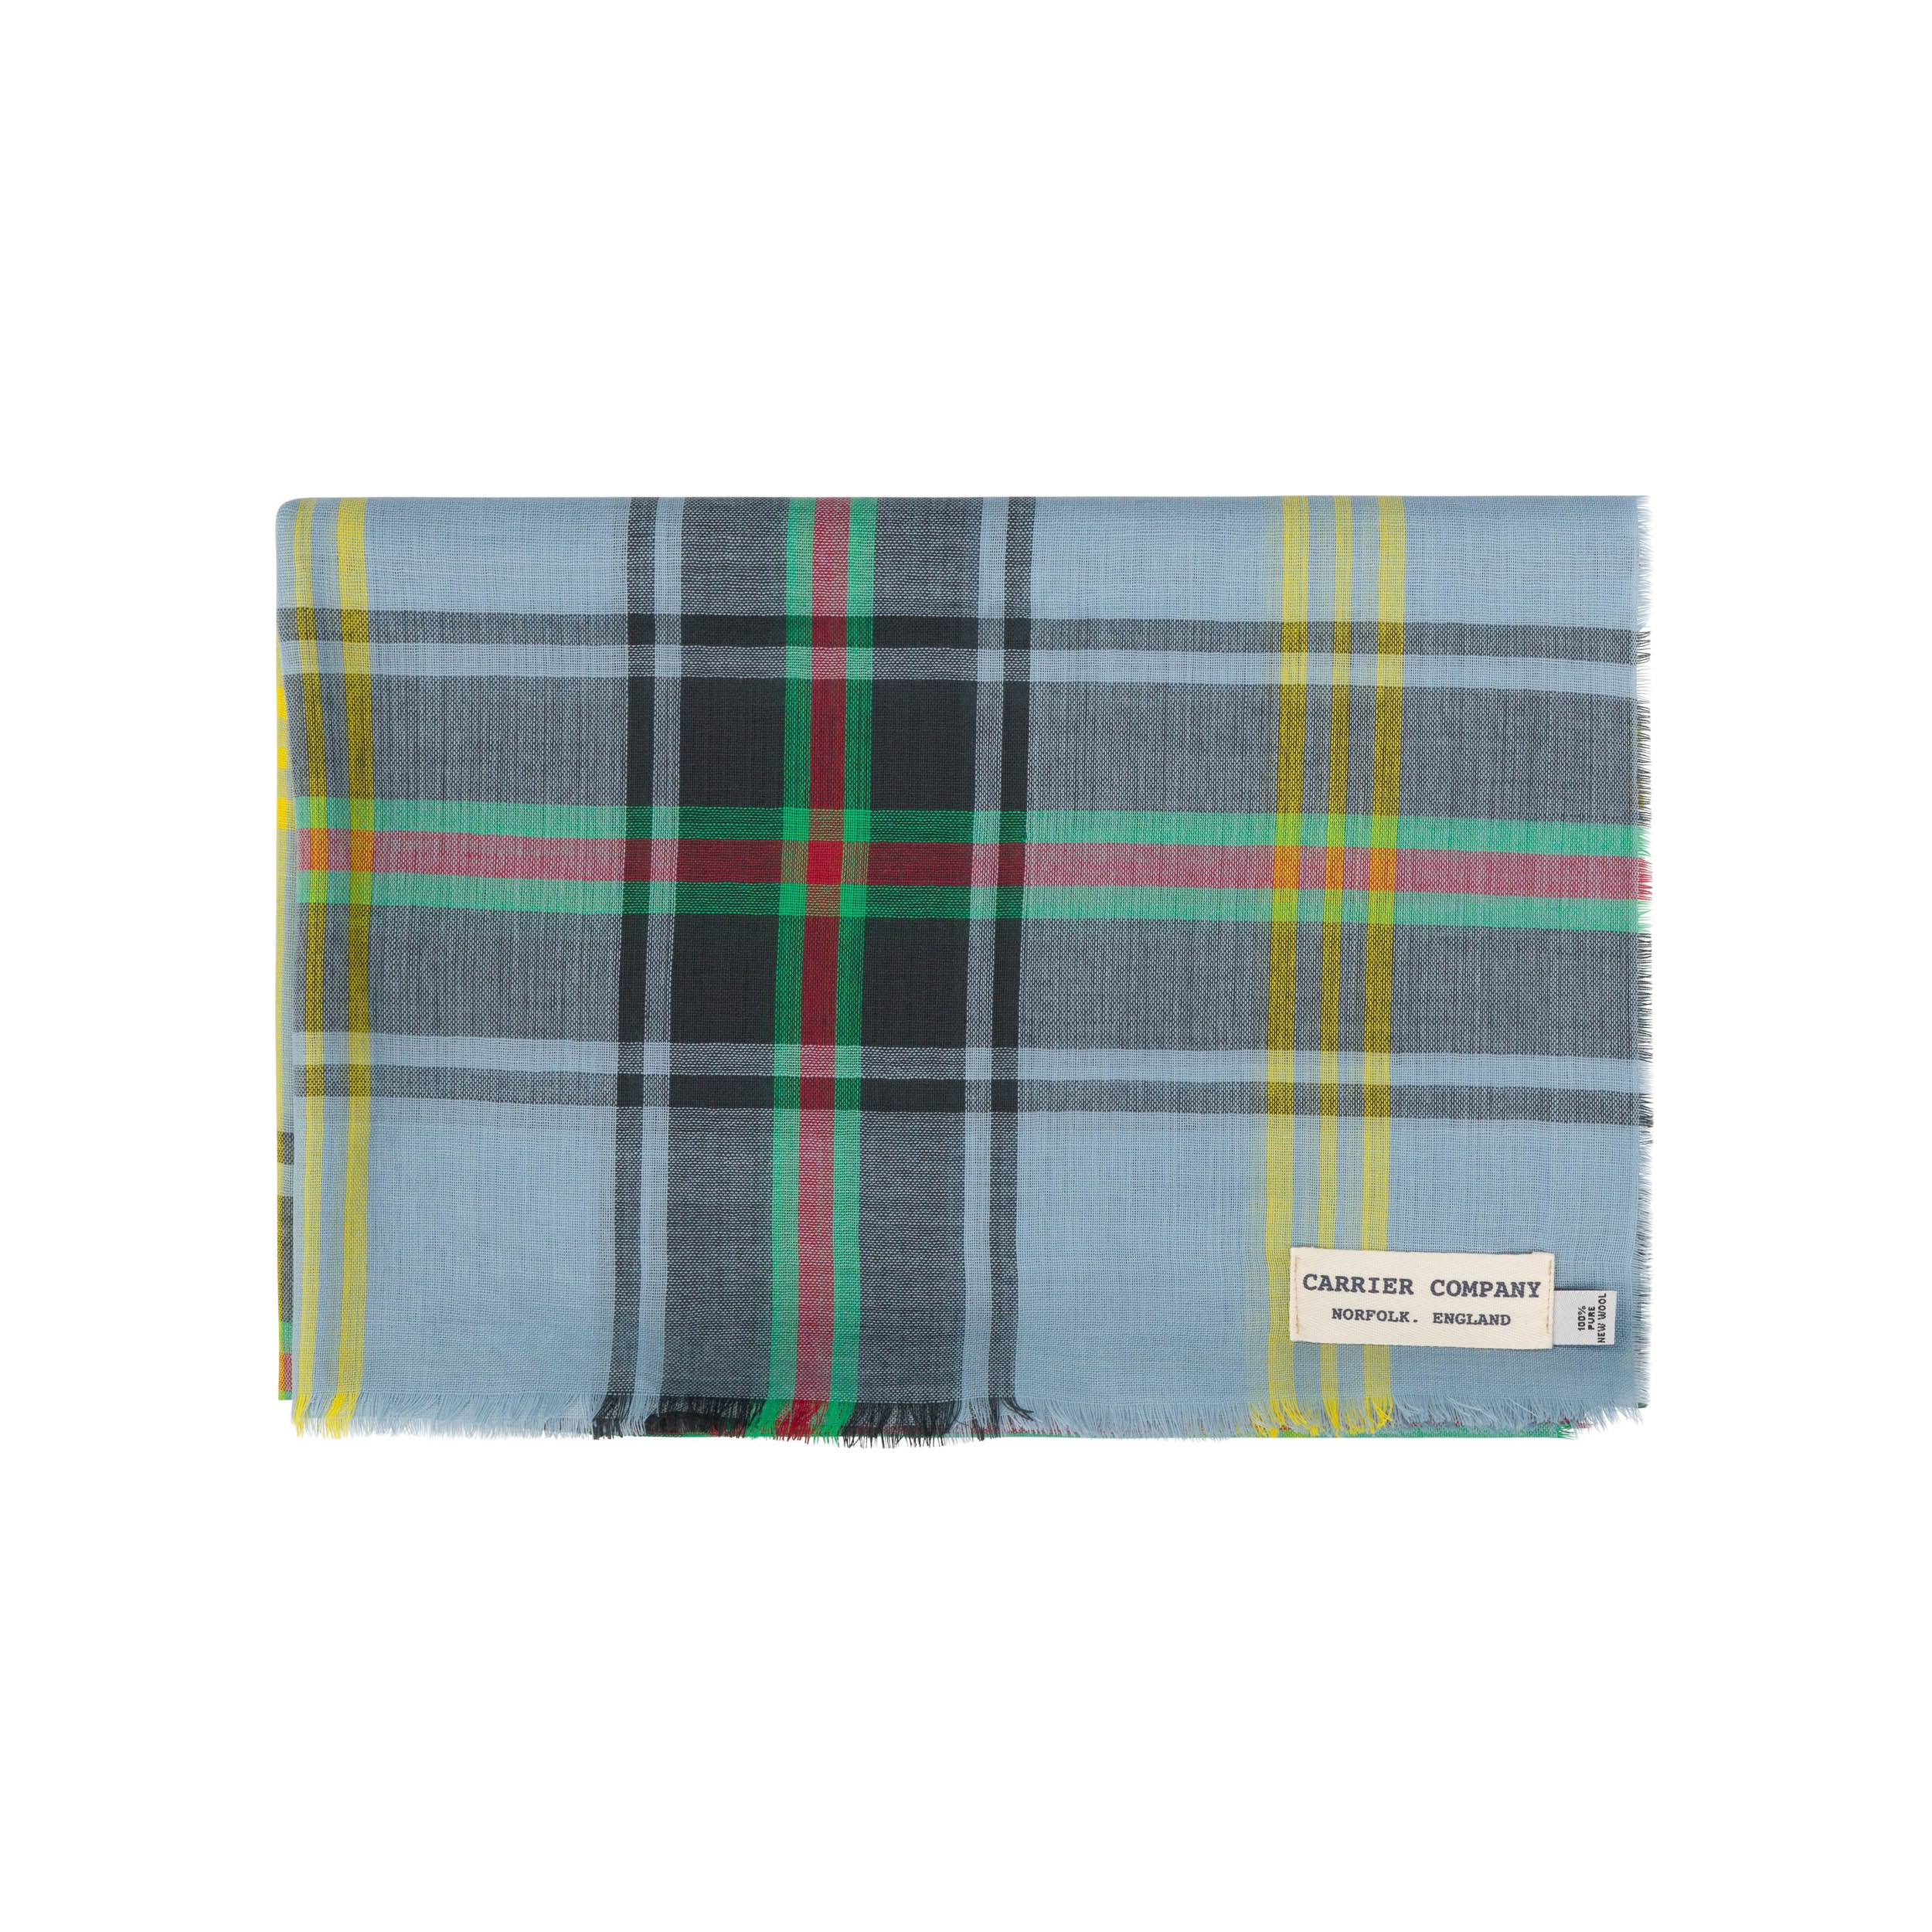 Carrier Company Extra Fine Merino Scarf in Bell of The Borders Tartan